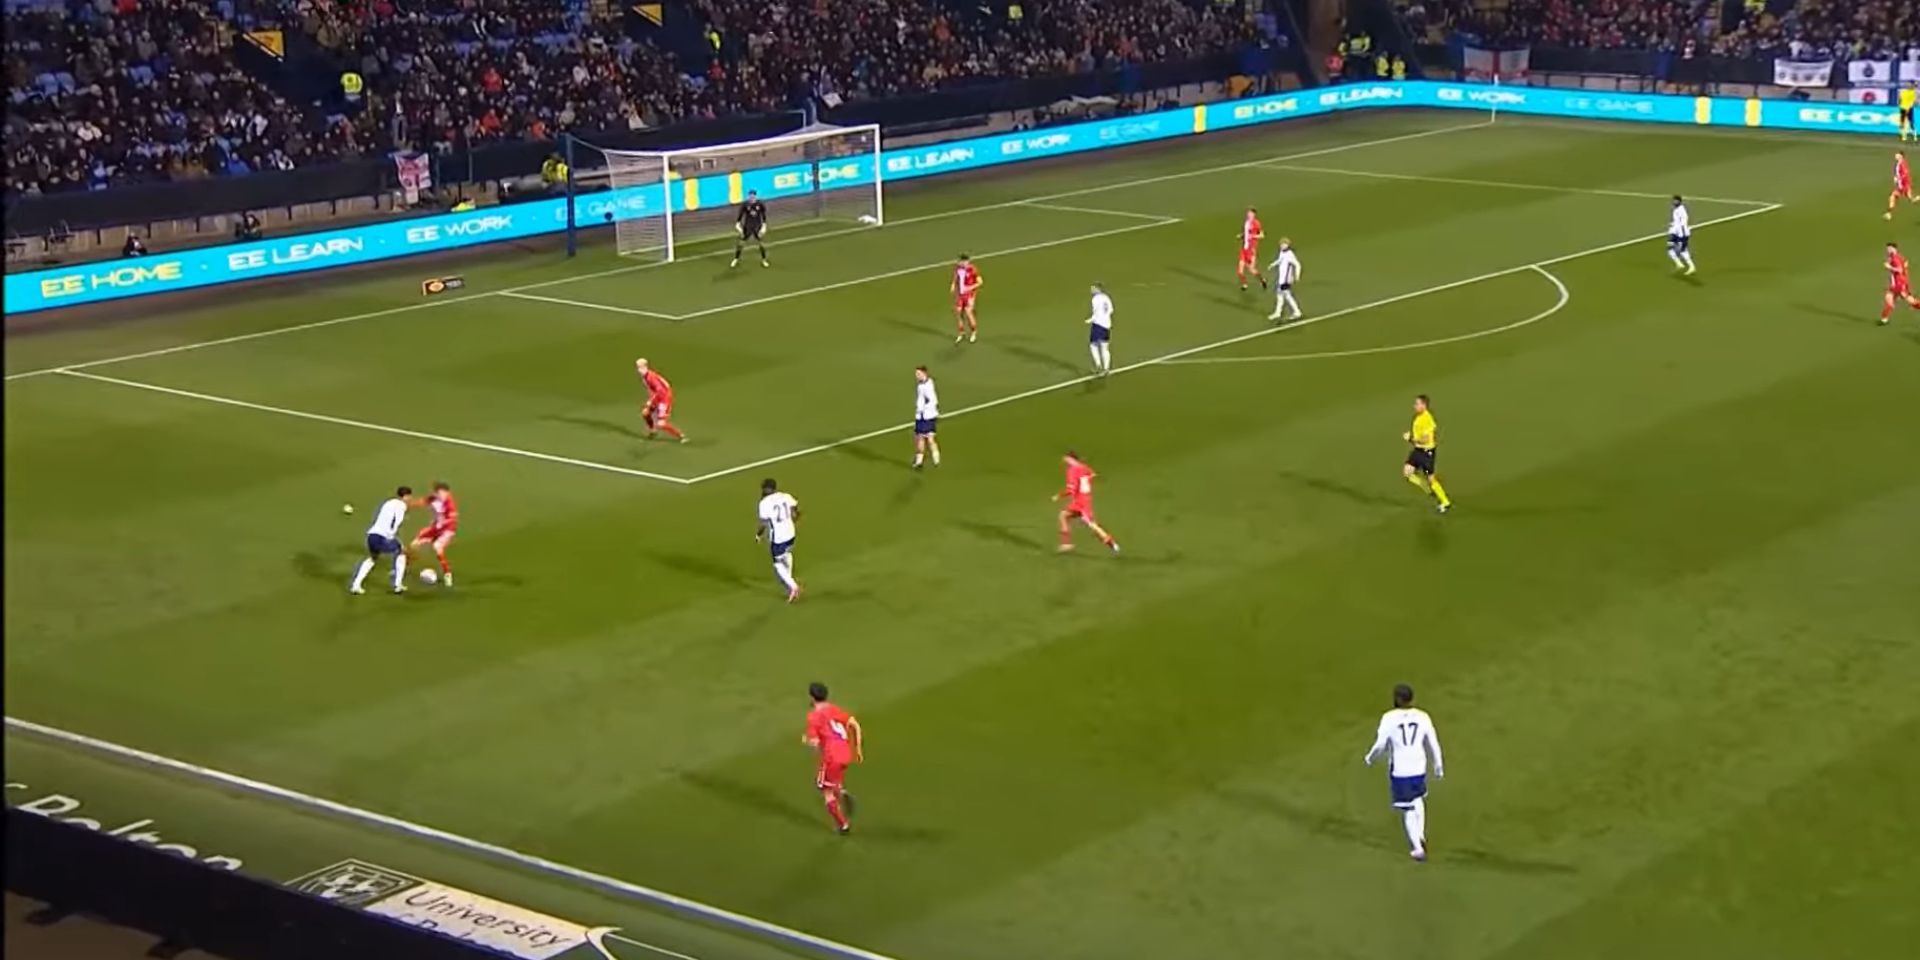 (Video) Quansah shows off attacking prowess with inspired run and shot on goal for England